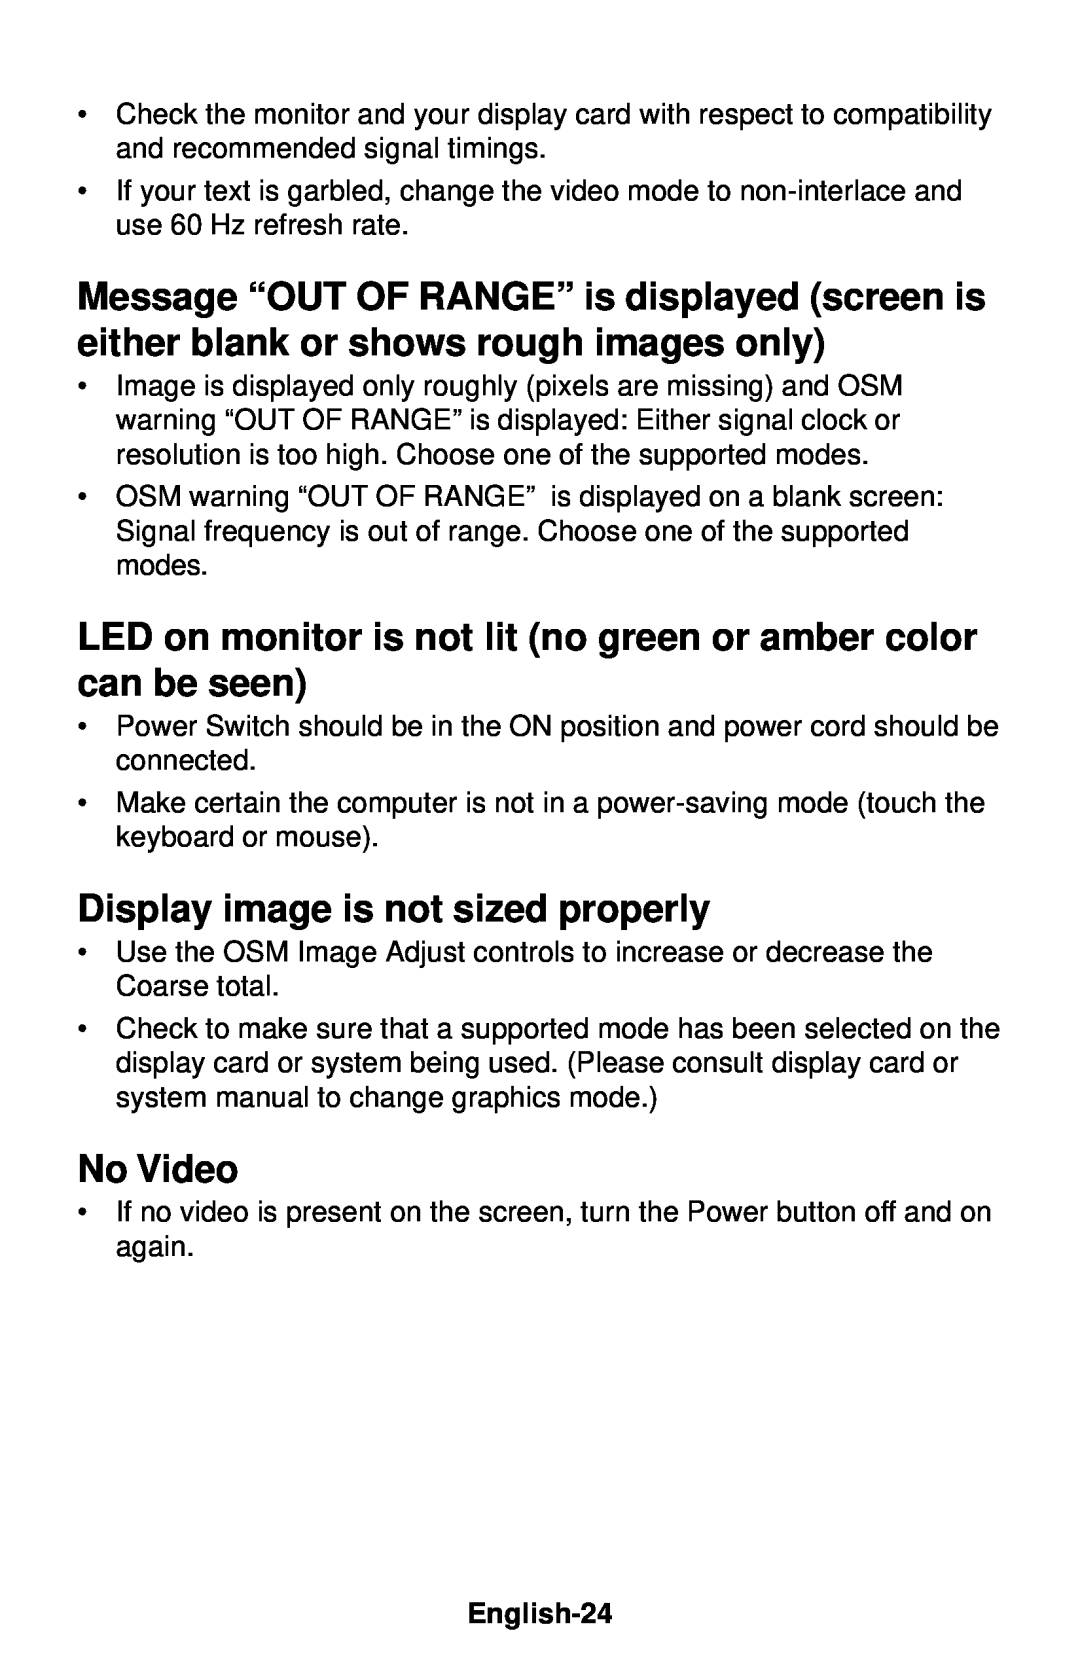 NEC LCD1830 LED on monitor is not lit no green or amber color can be seen, Display image is not sized properly, No Video 